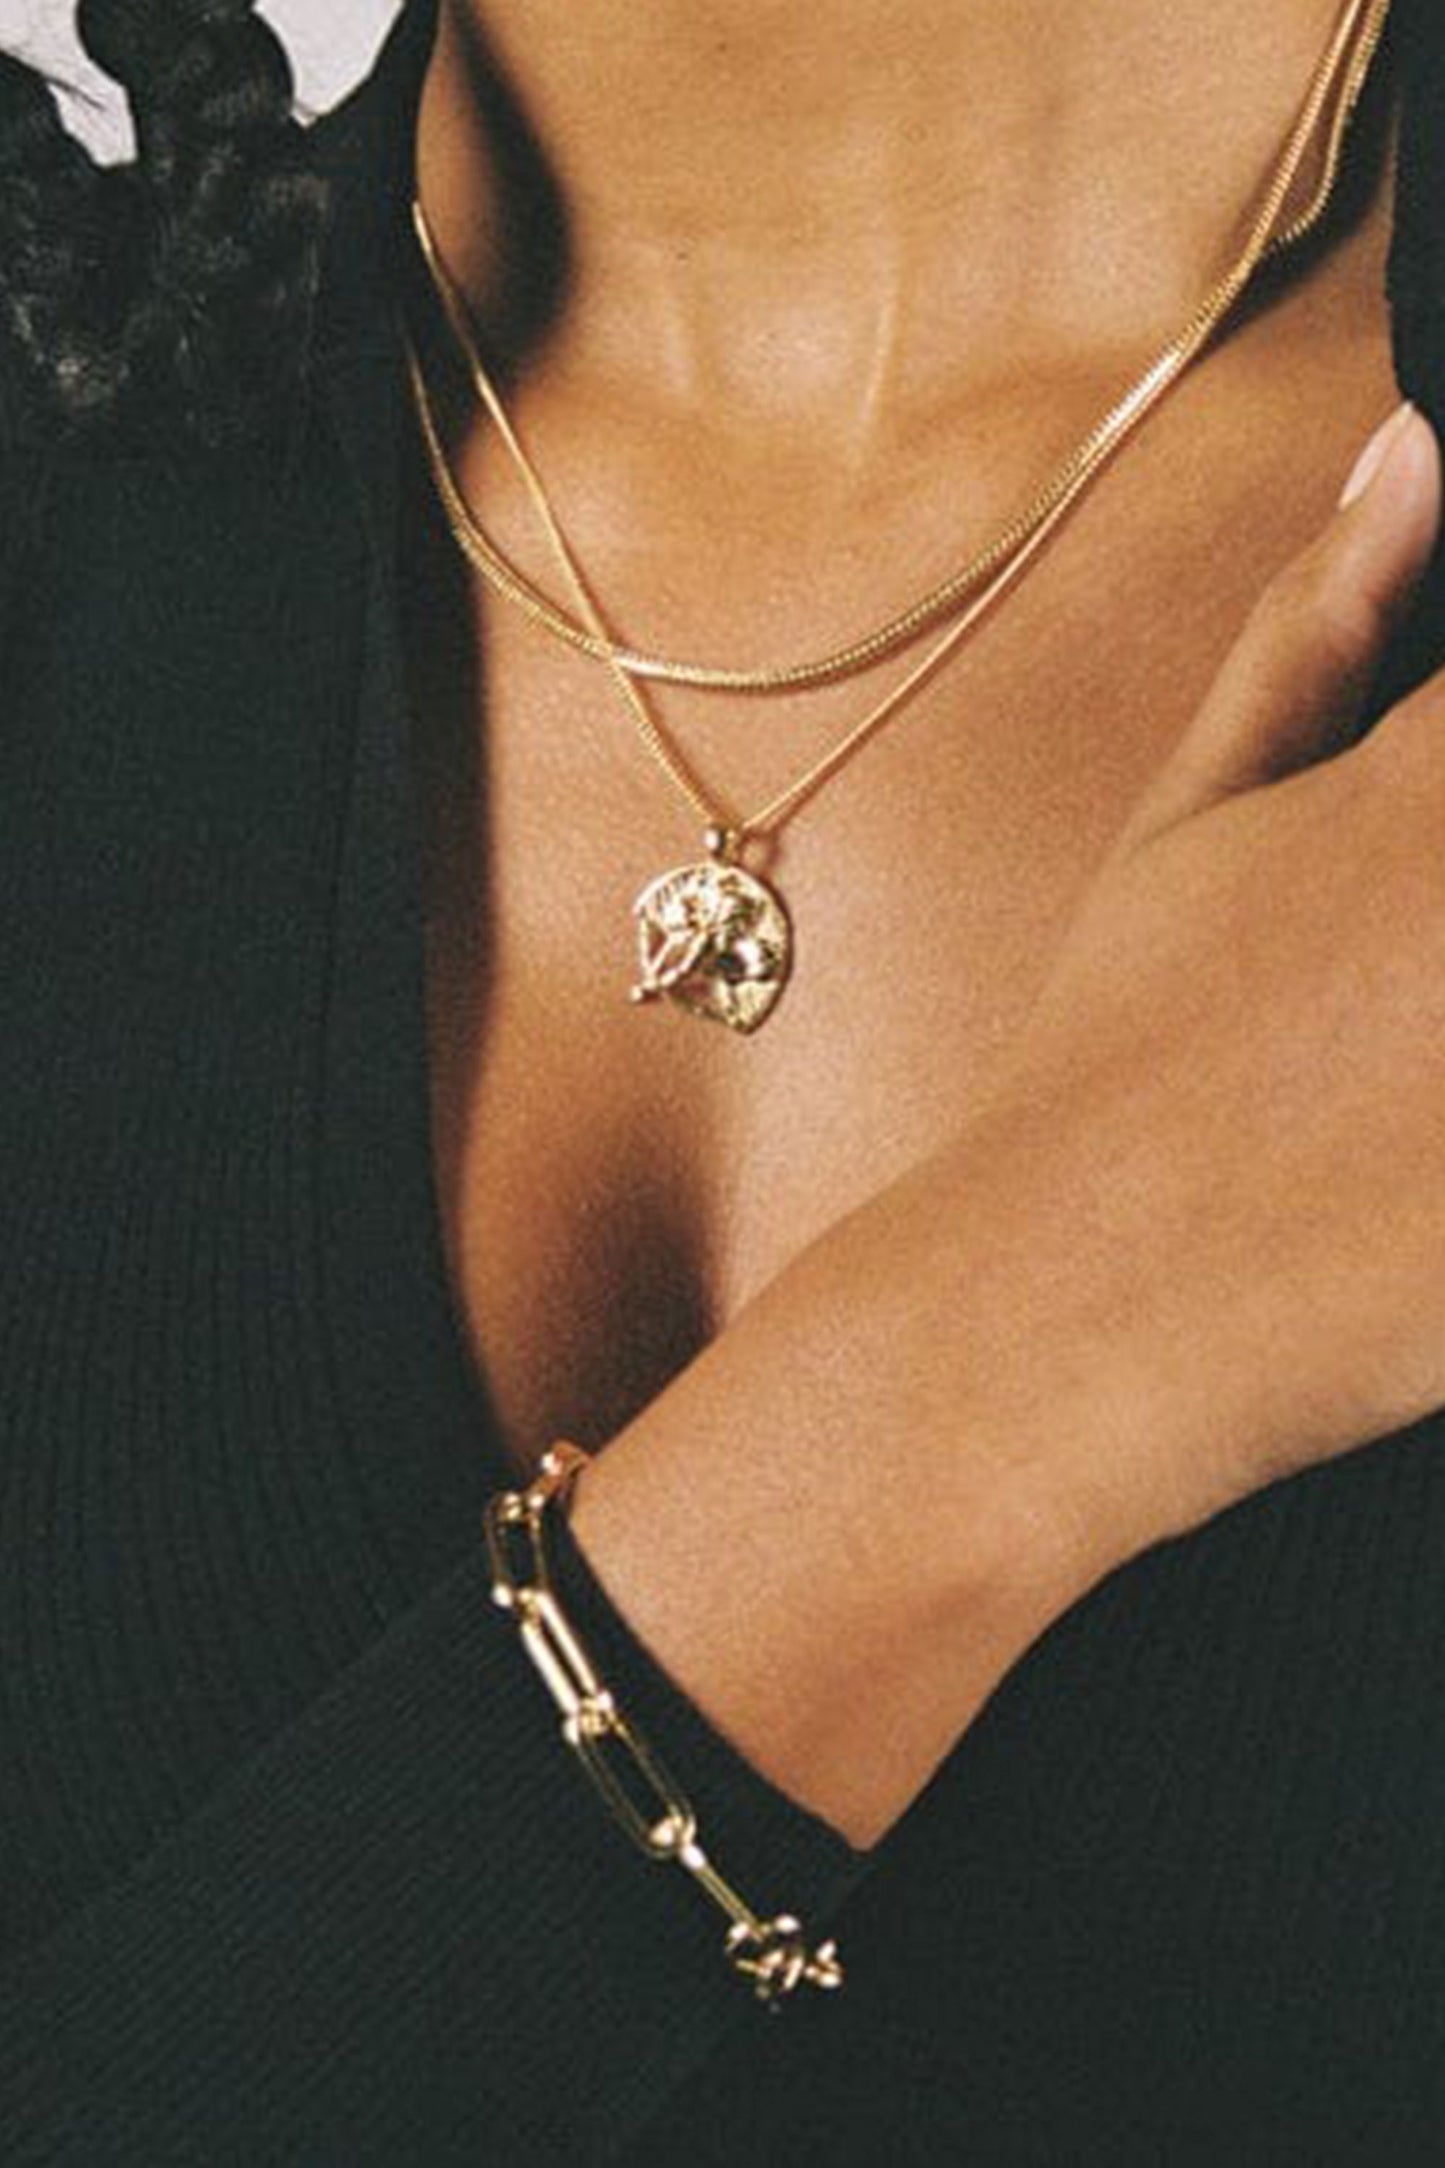 Pukas-Surf-Shop-TwoJeys-TwoJeys-Cupid-Necklace-gold